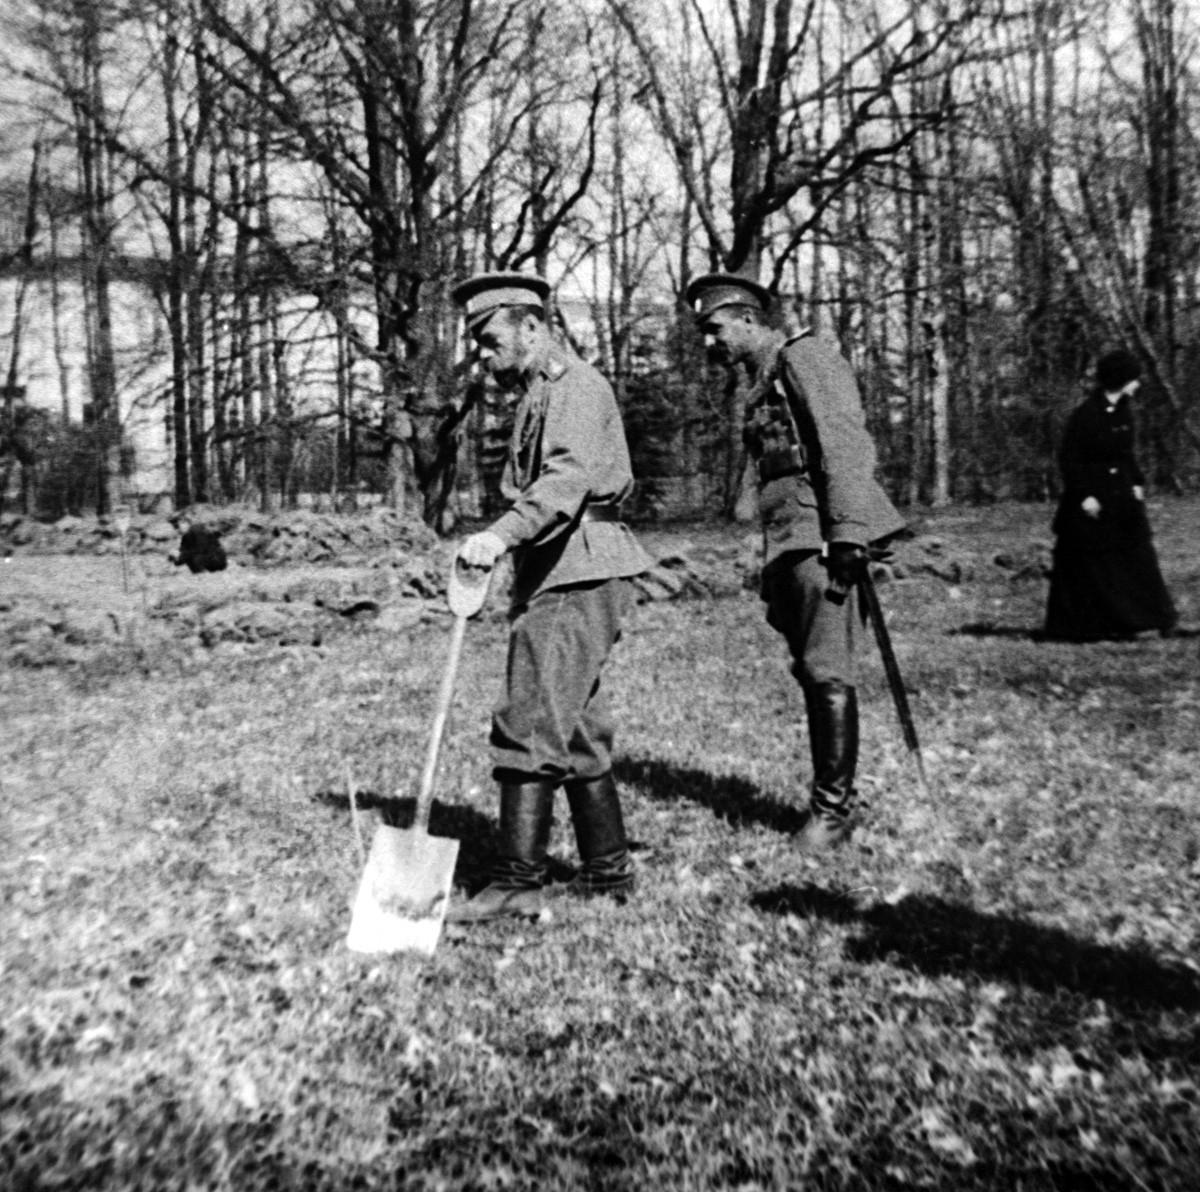 Emperor Nicholas II of Russia (L) holds a shovel while being under a house arrest in Tsarskoye Selo